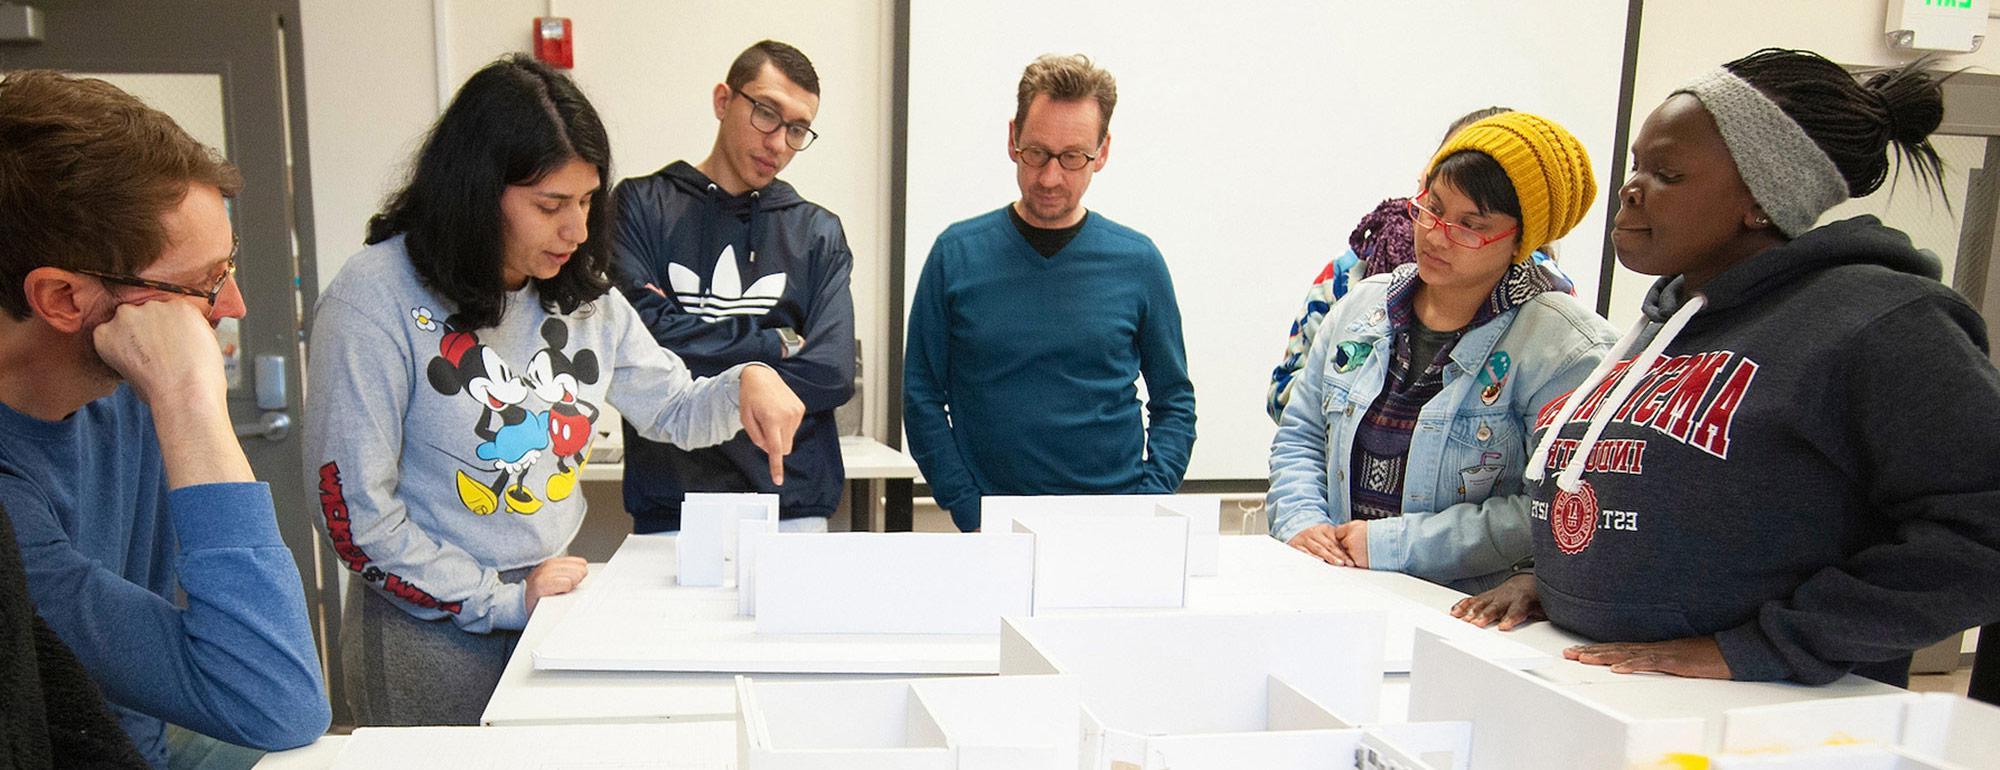 transfer students standing around a model of a building in a design class